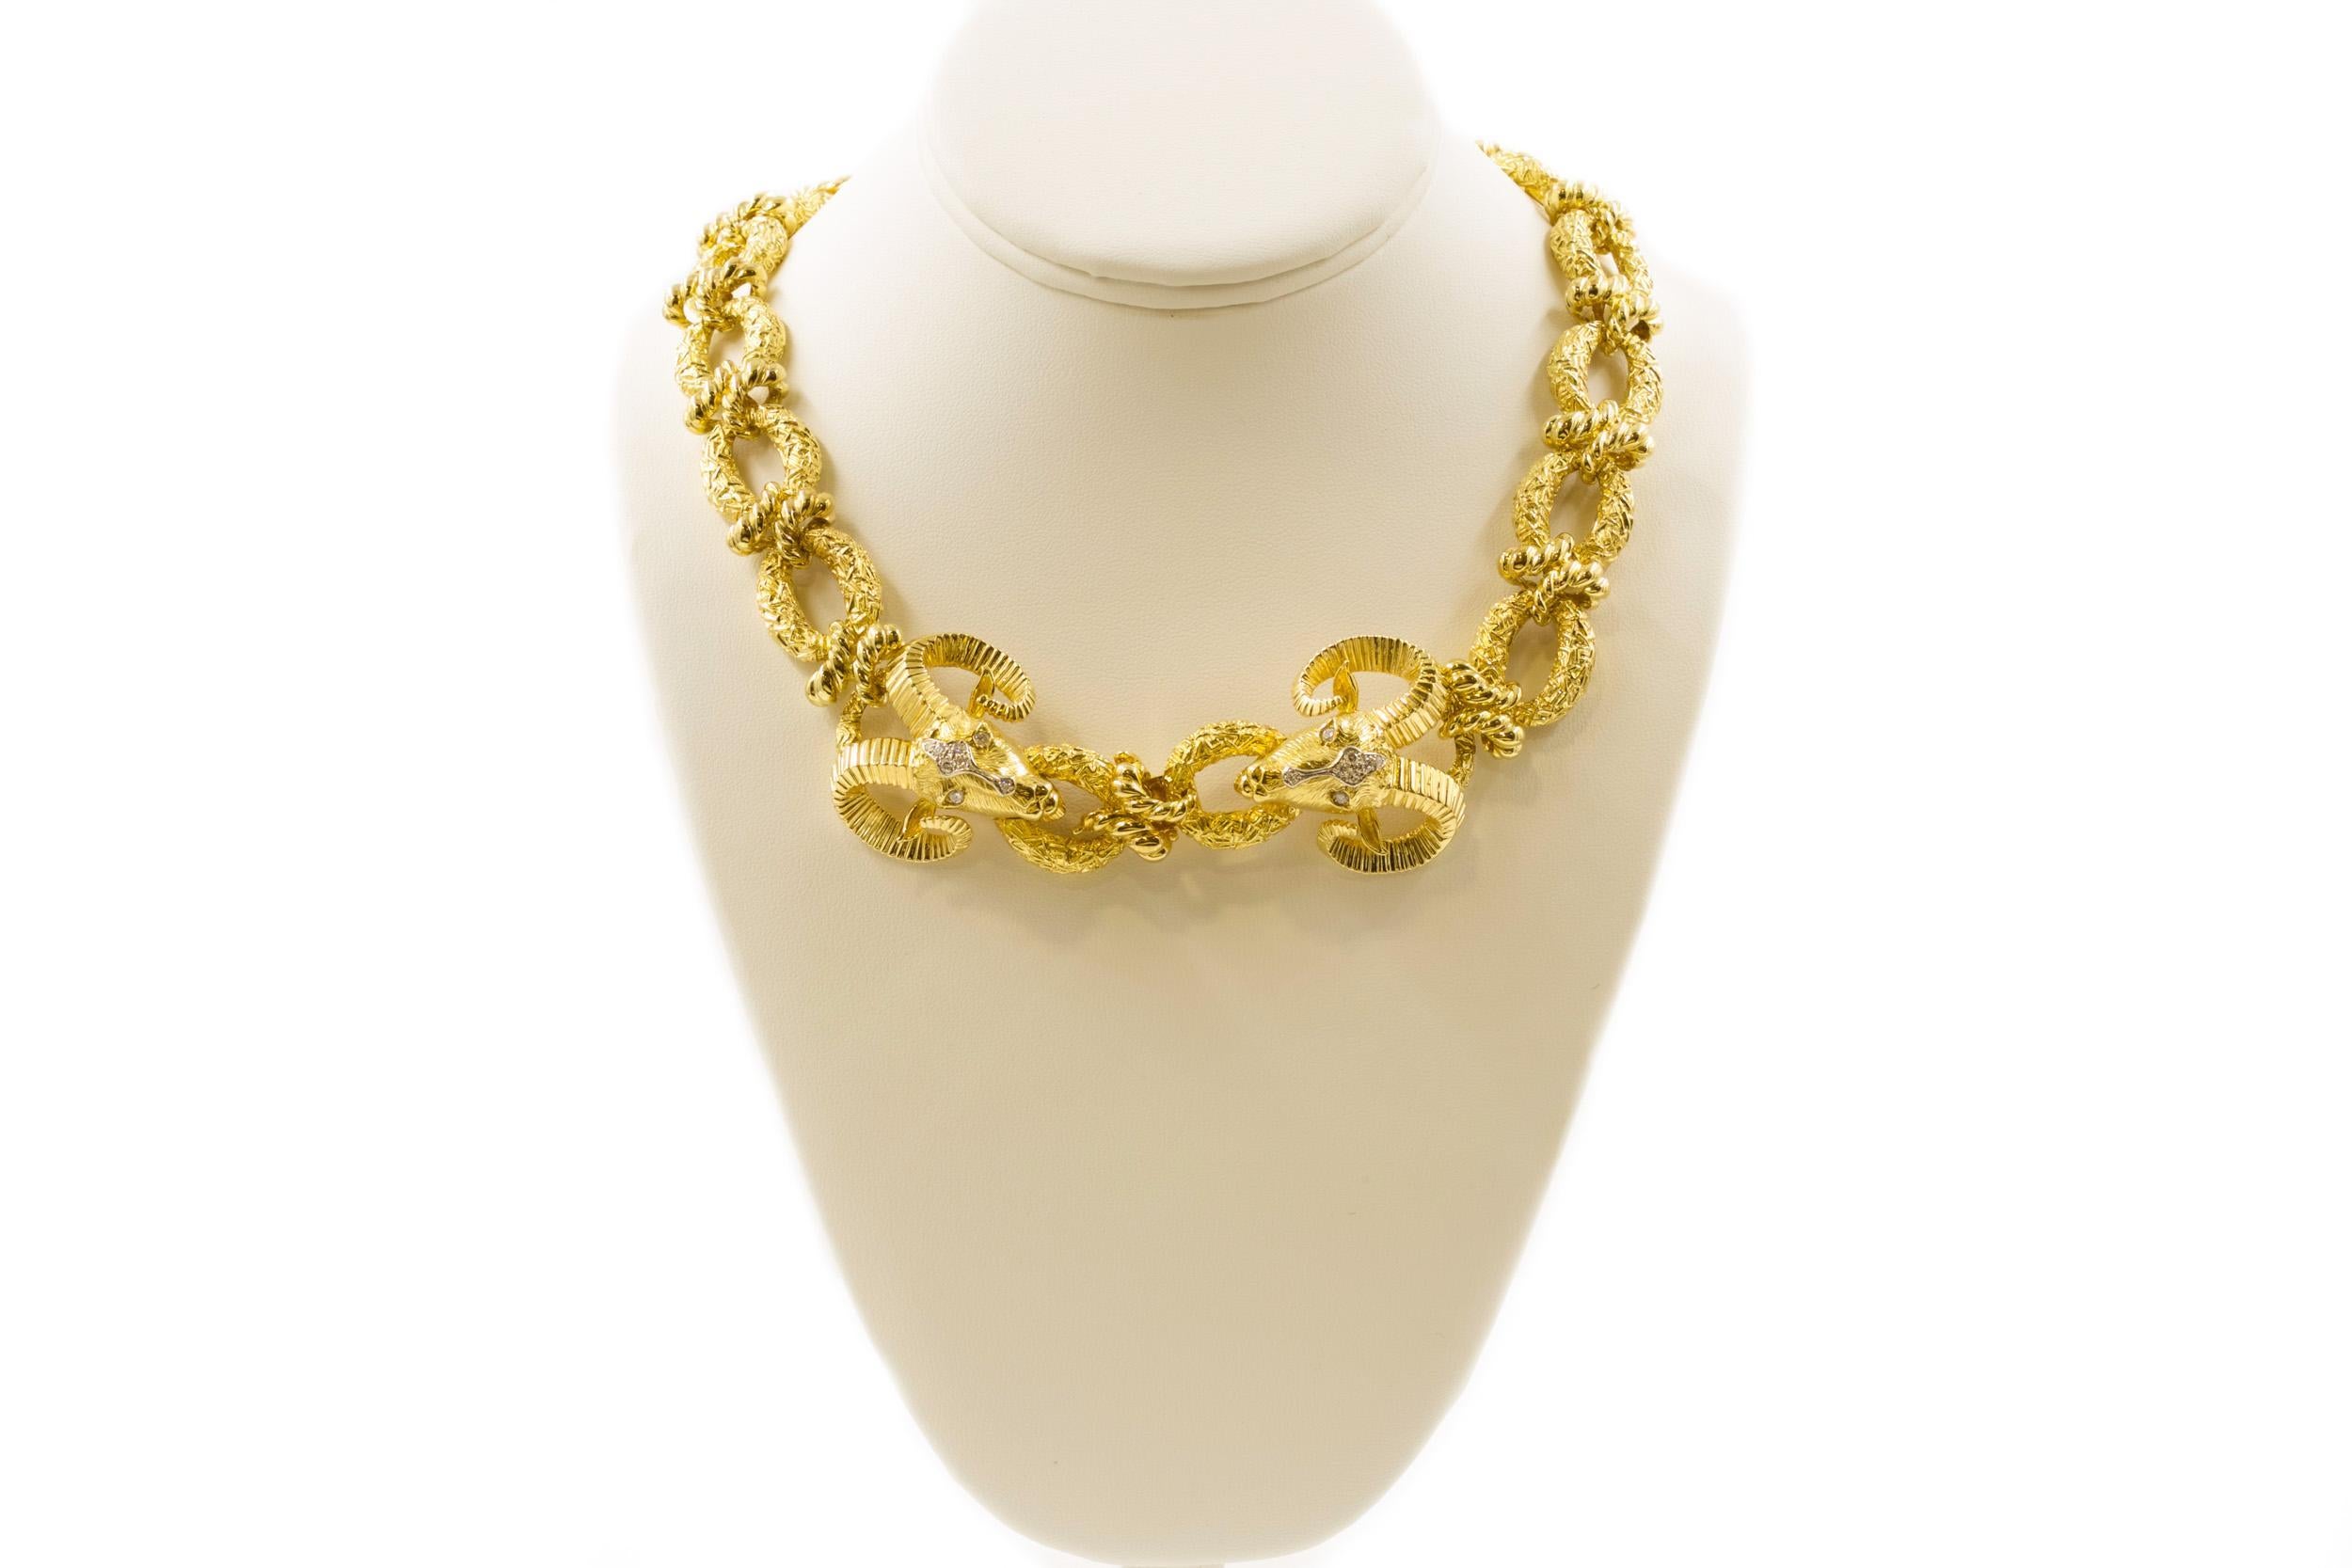 American 14k Gold Ram's Head Necklace, Bracelet and Ring by La Triomphe, 250.7 grams